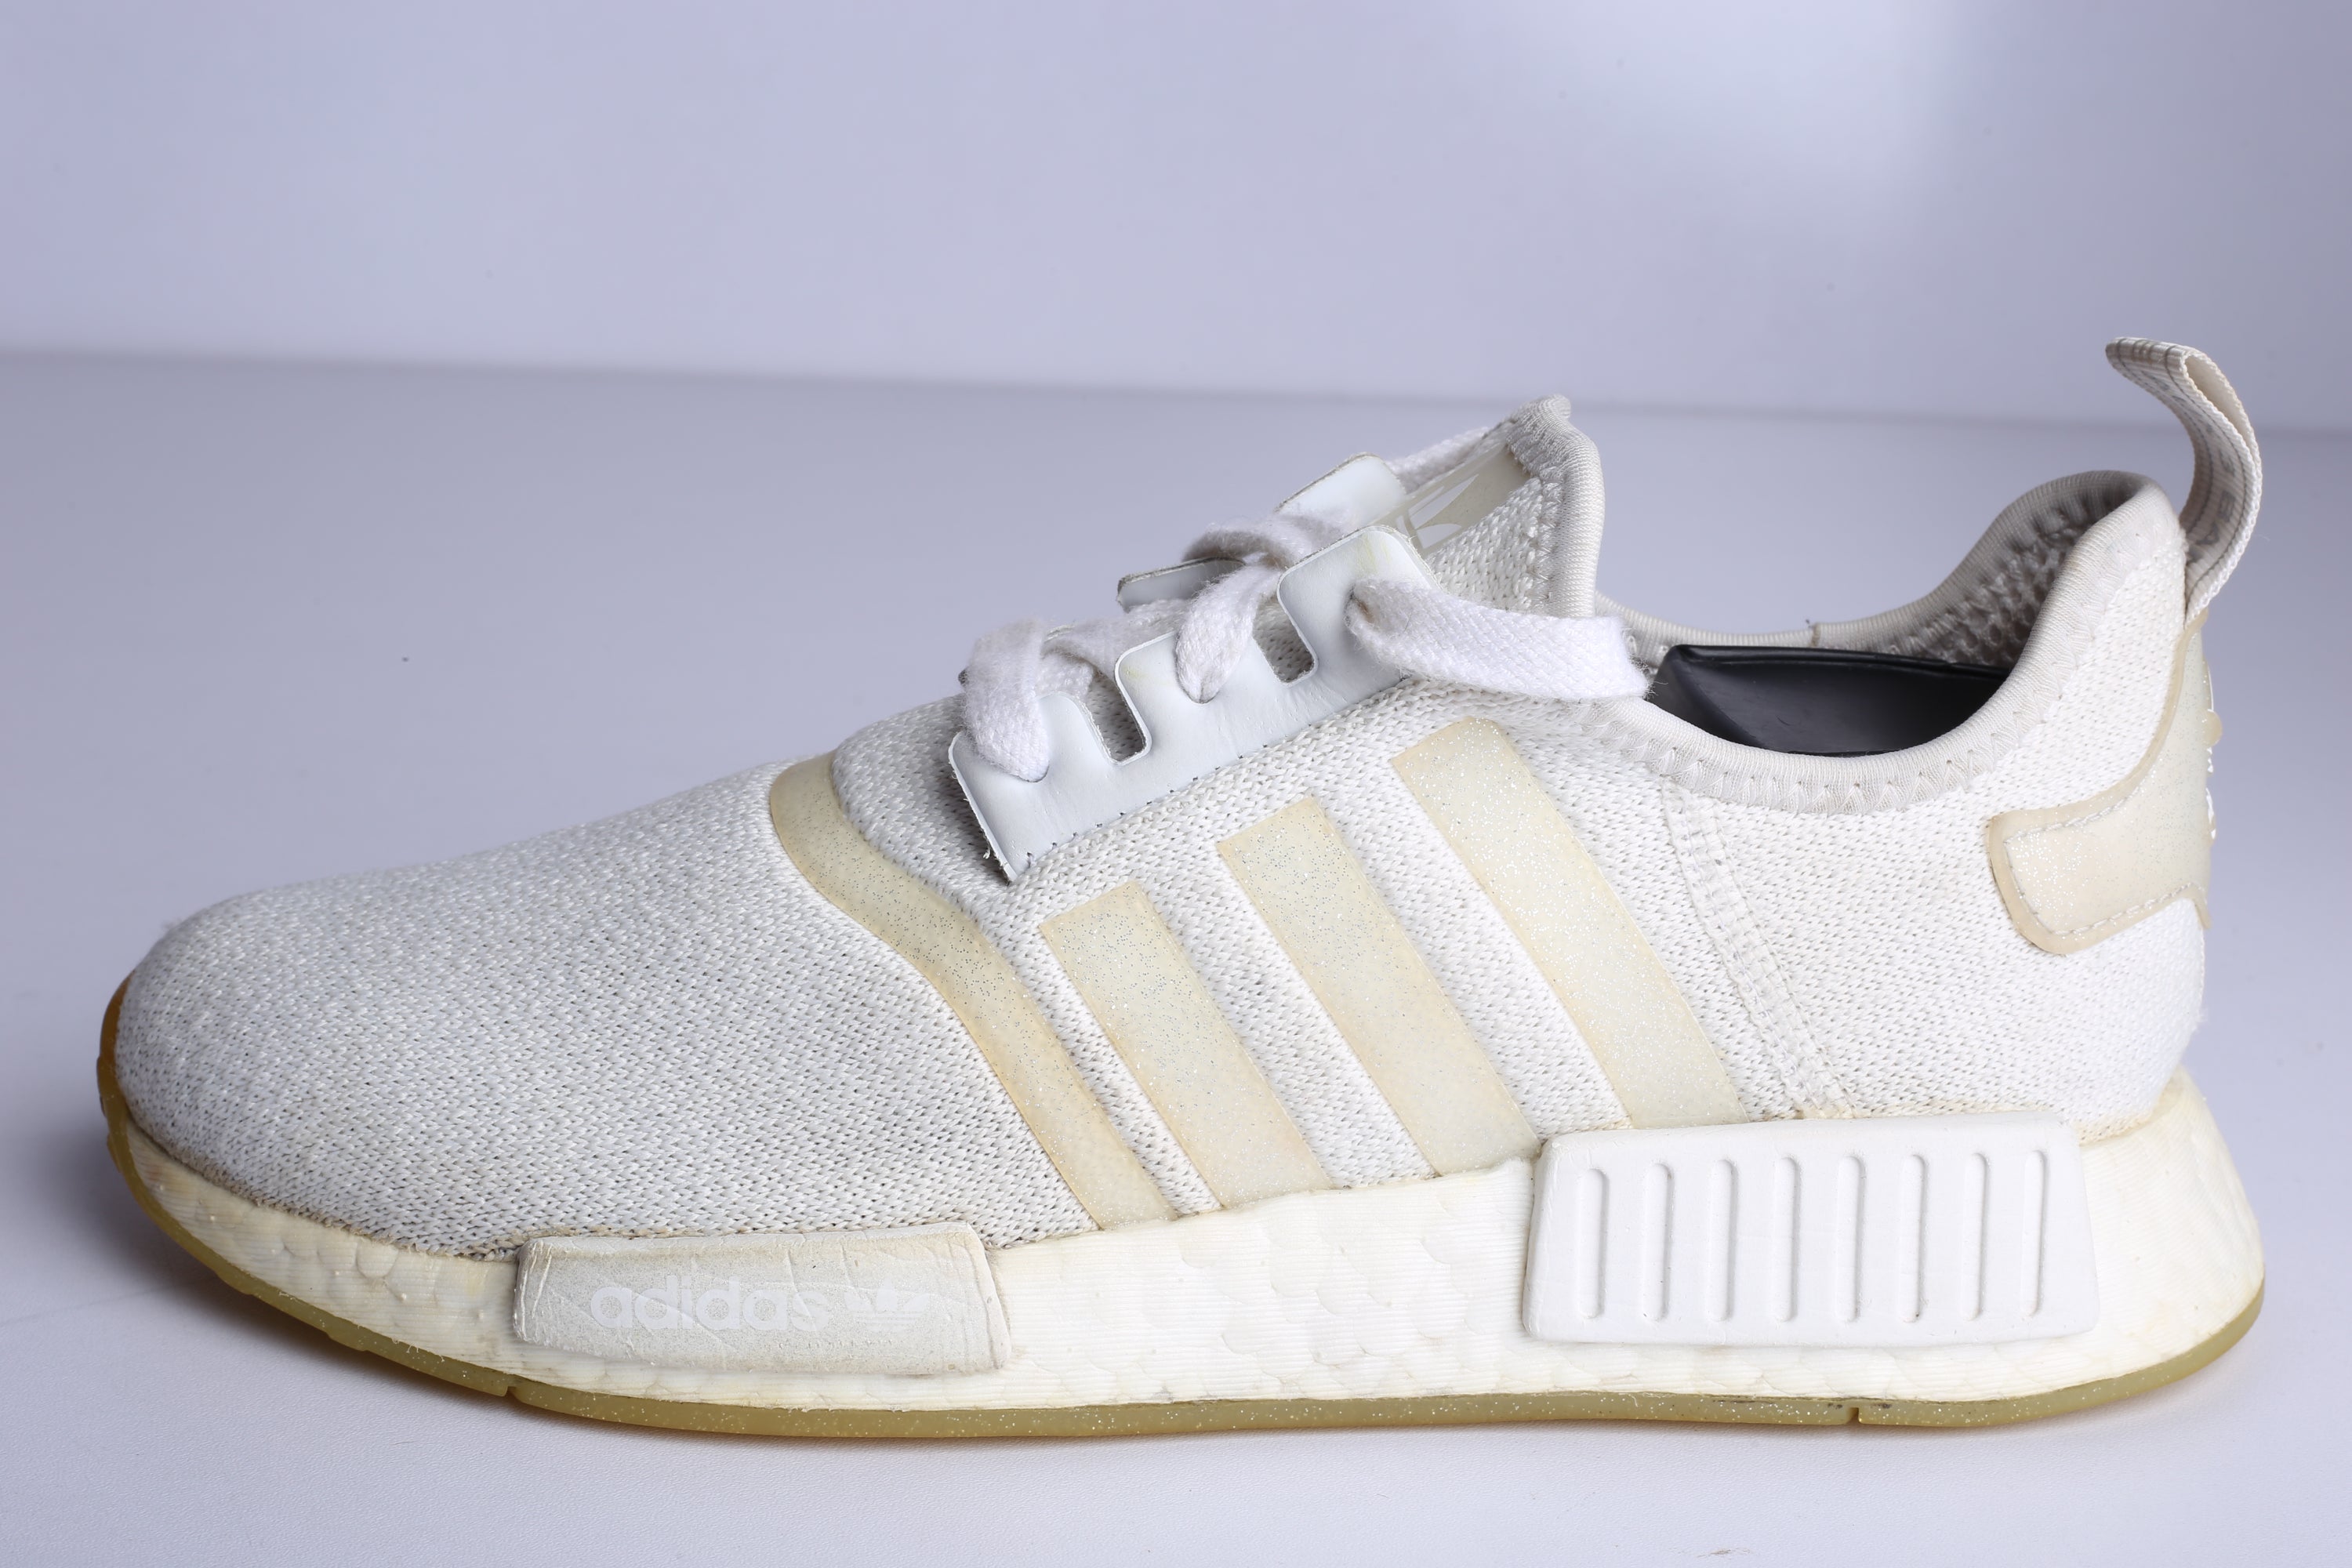 Adidas NMD R1 Sneaker - (Condition Excellent)